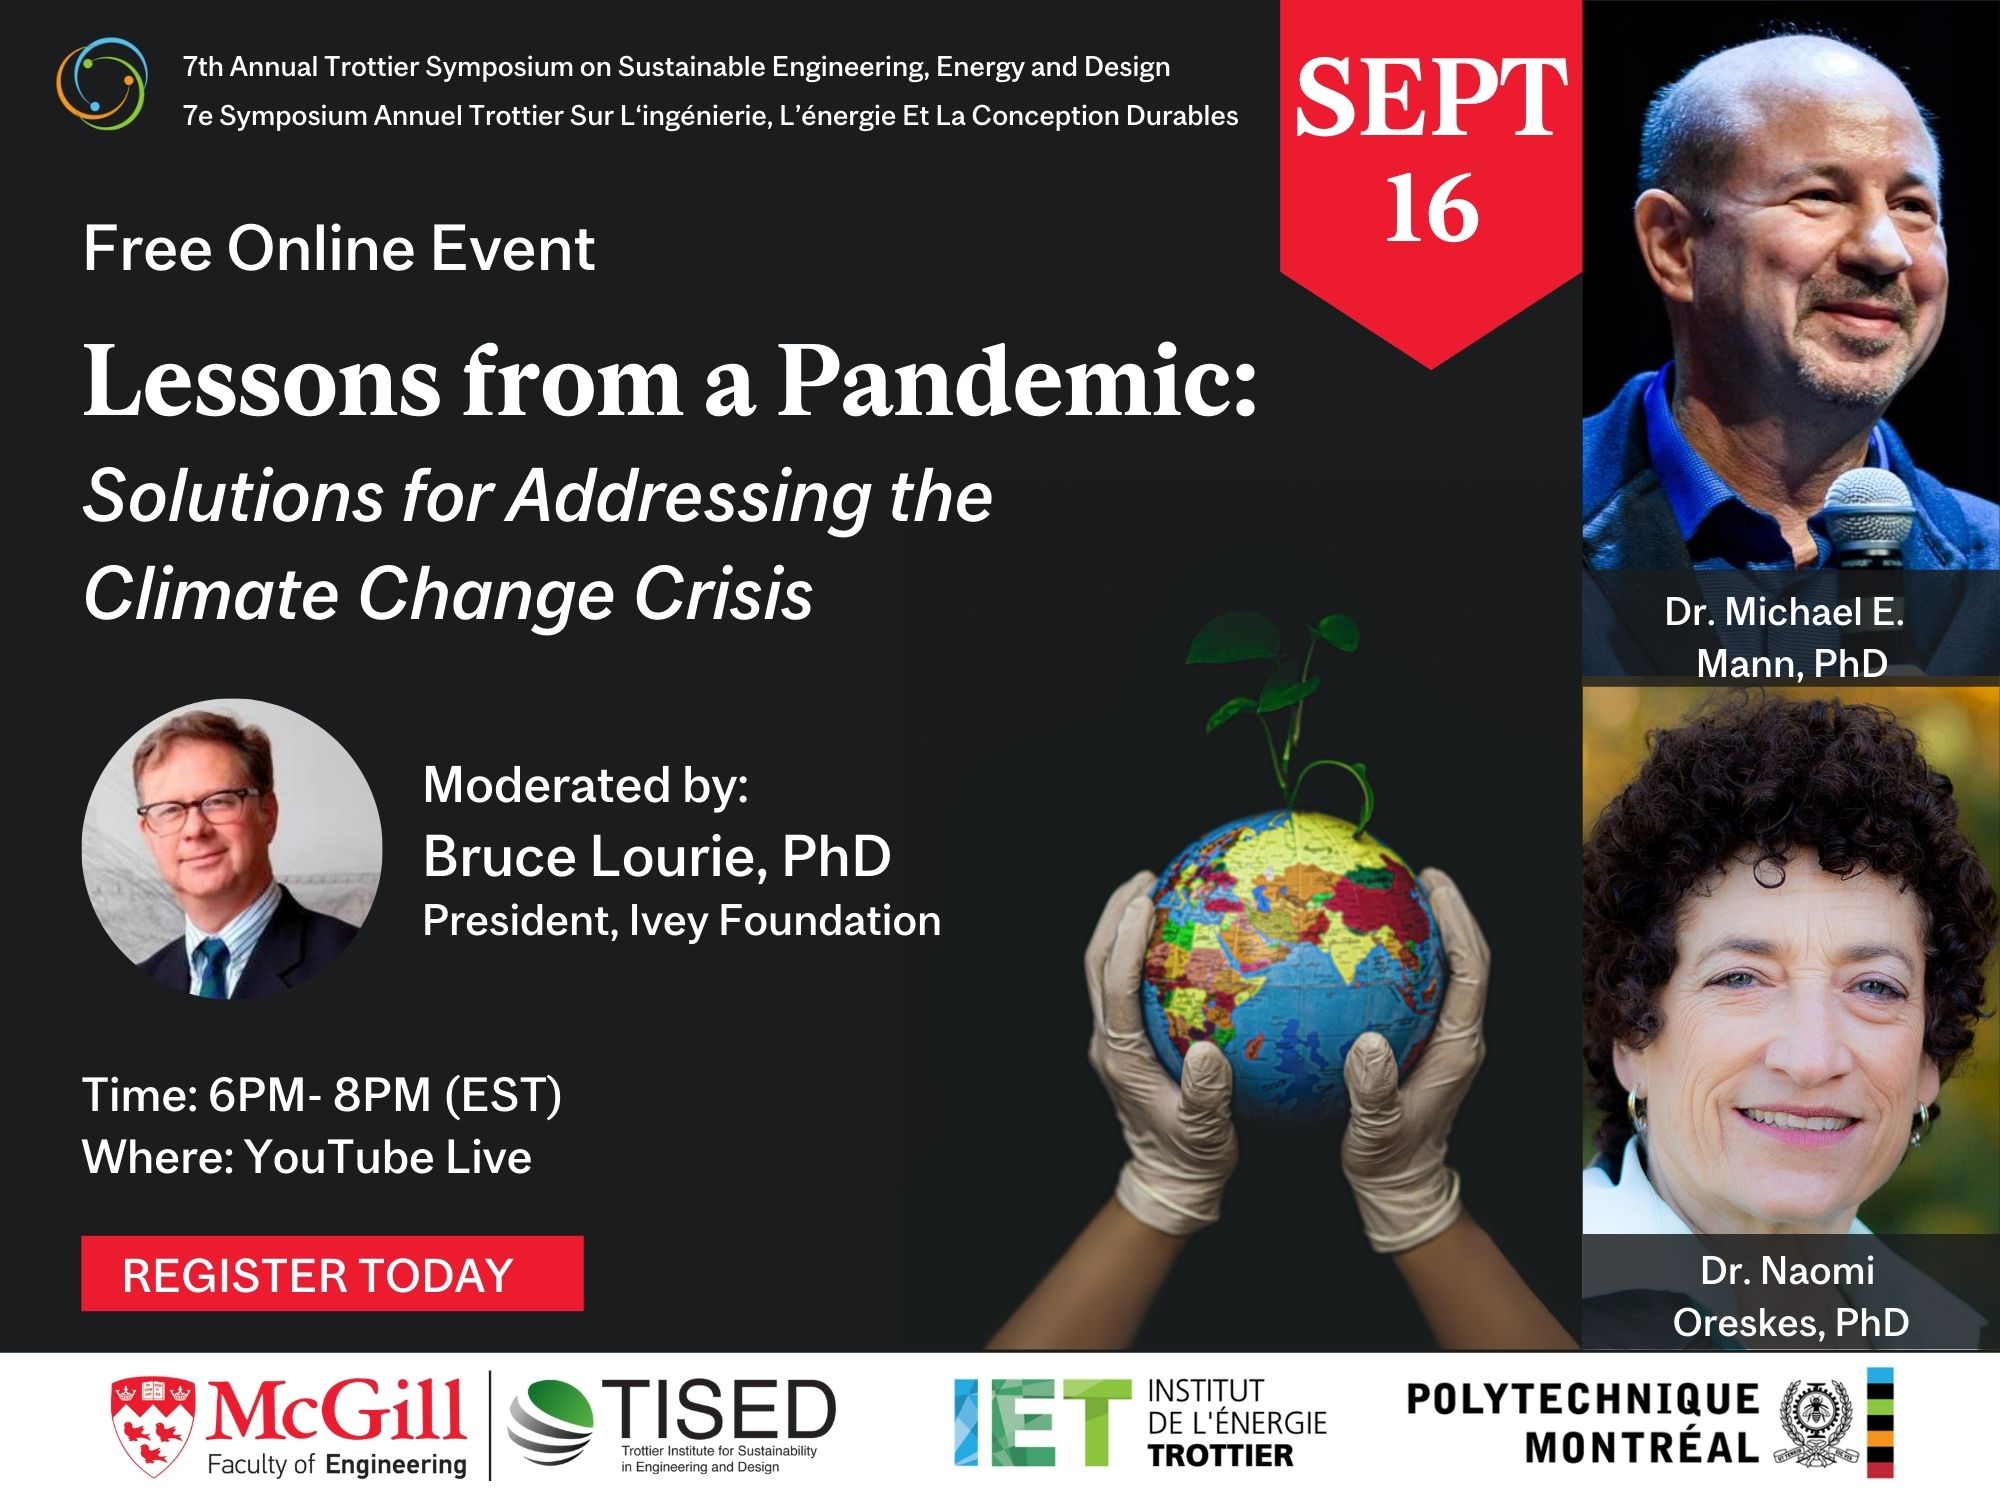 Lessons from a Pandemic: Solutions for Addressing the Climate Change Crisis